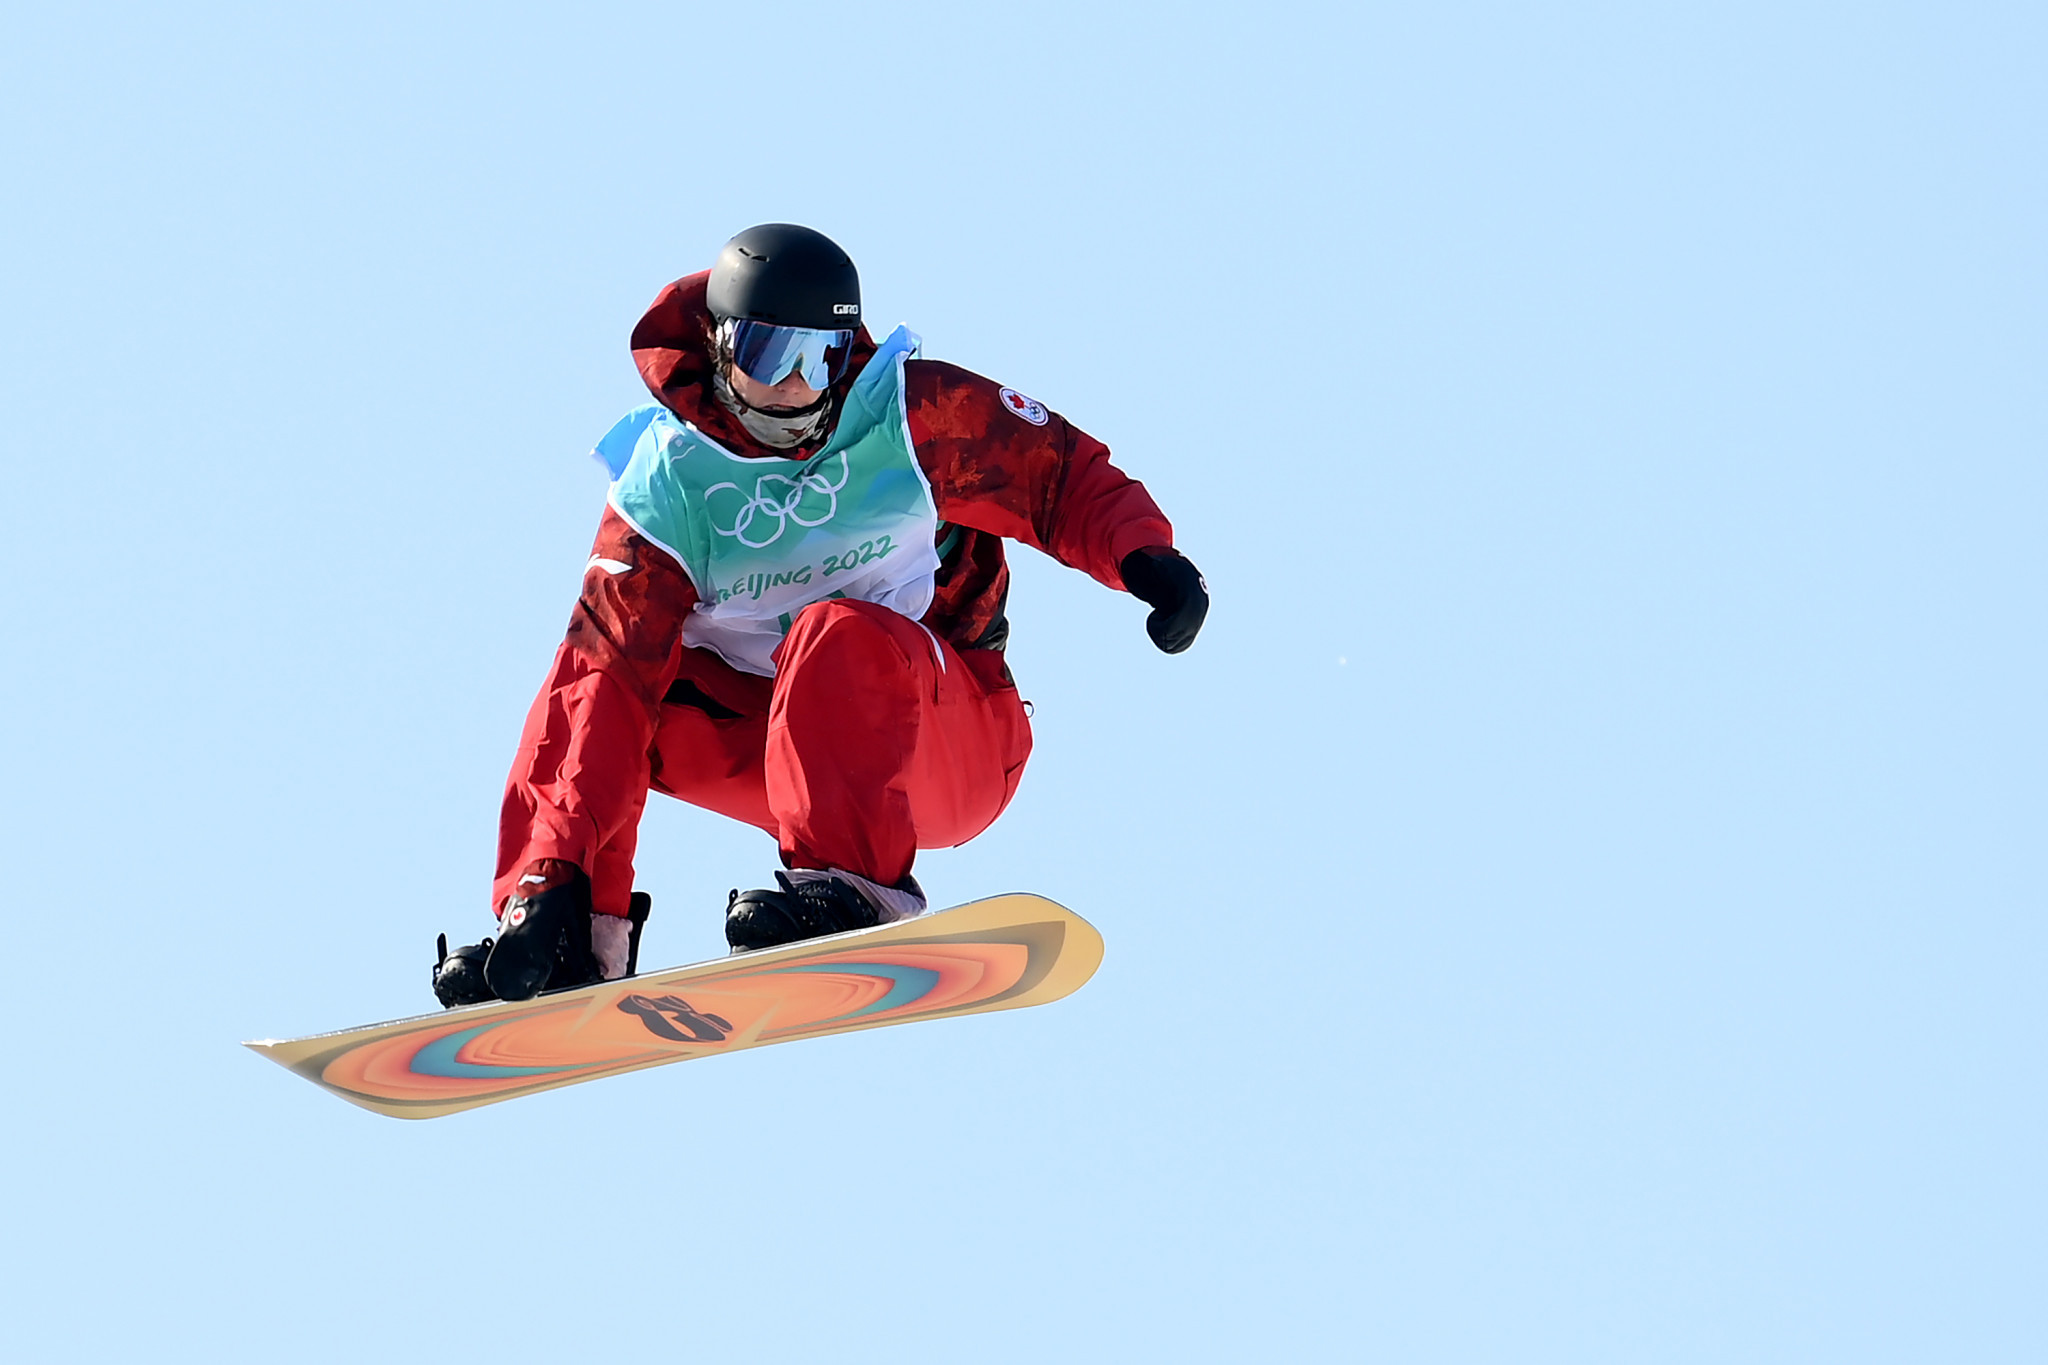 Sharpe earns first Snowboard World Cup win since 2015 at home slopestyle event in Calgary